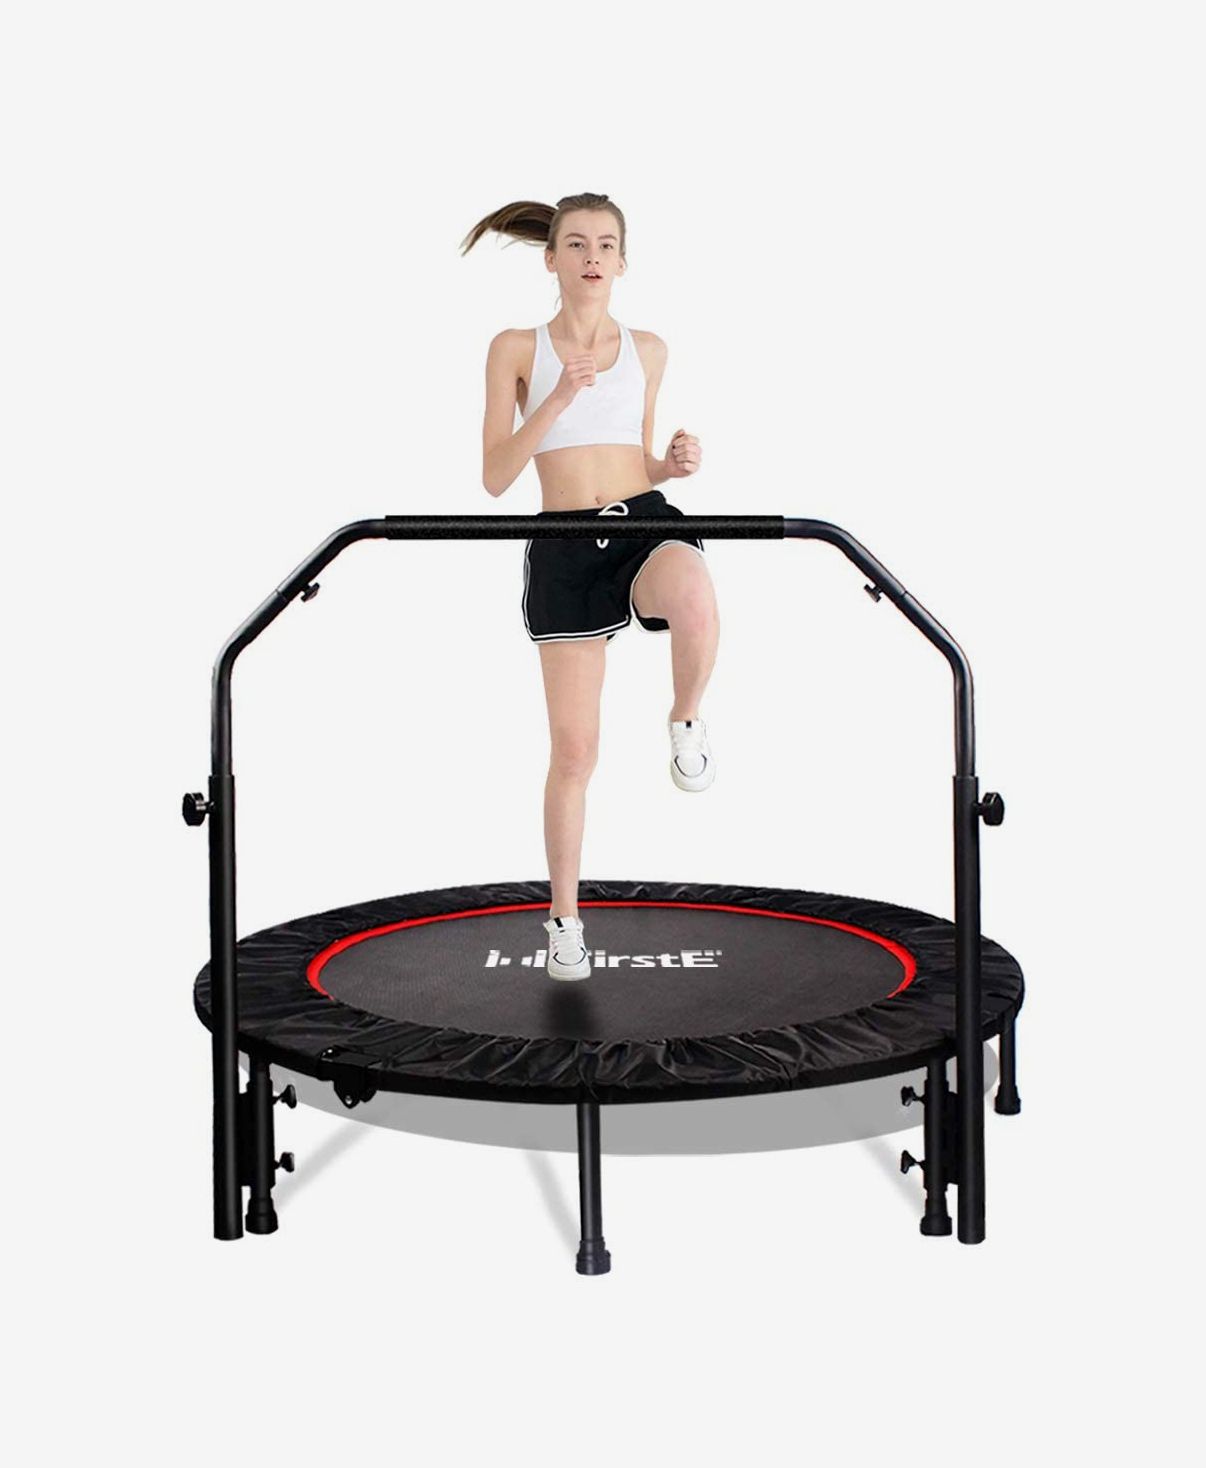 Foldable Trampoline Gym Rebounder Home Exercise Mini Rebounder Trampoline Trampette Fitness Exercise Bouncer lahomie Indoor Mini Trampoline for Adults 